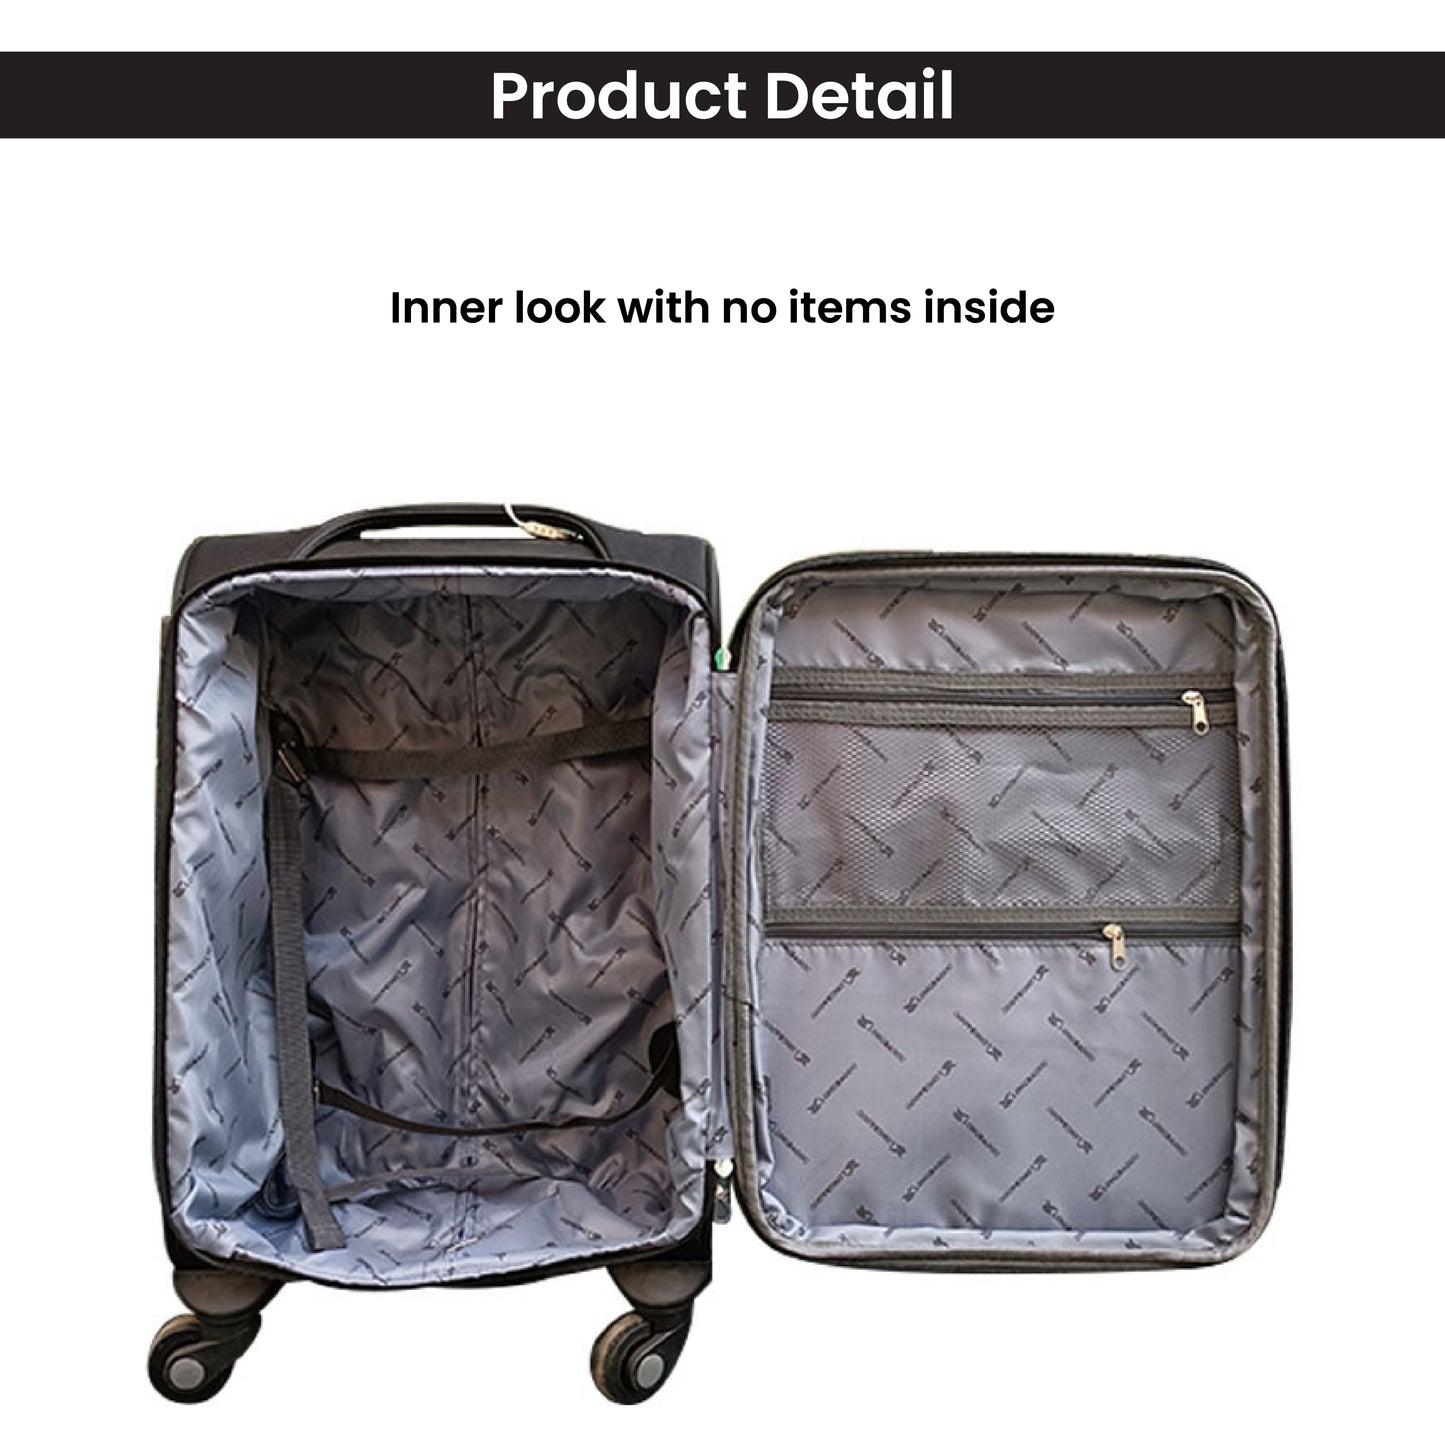 BLUE MOUNTAIN 20"/24" TITAN EXPANDABLE PREMIUM OXFORD POLYESTER SUITCASES LUGGAGE HAND TROLLEY LOCK